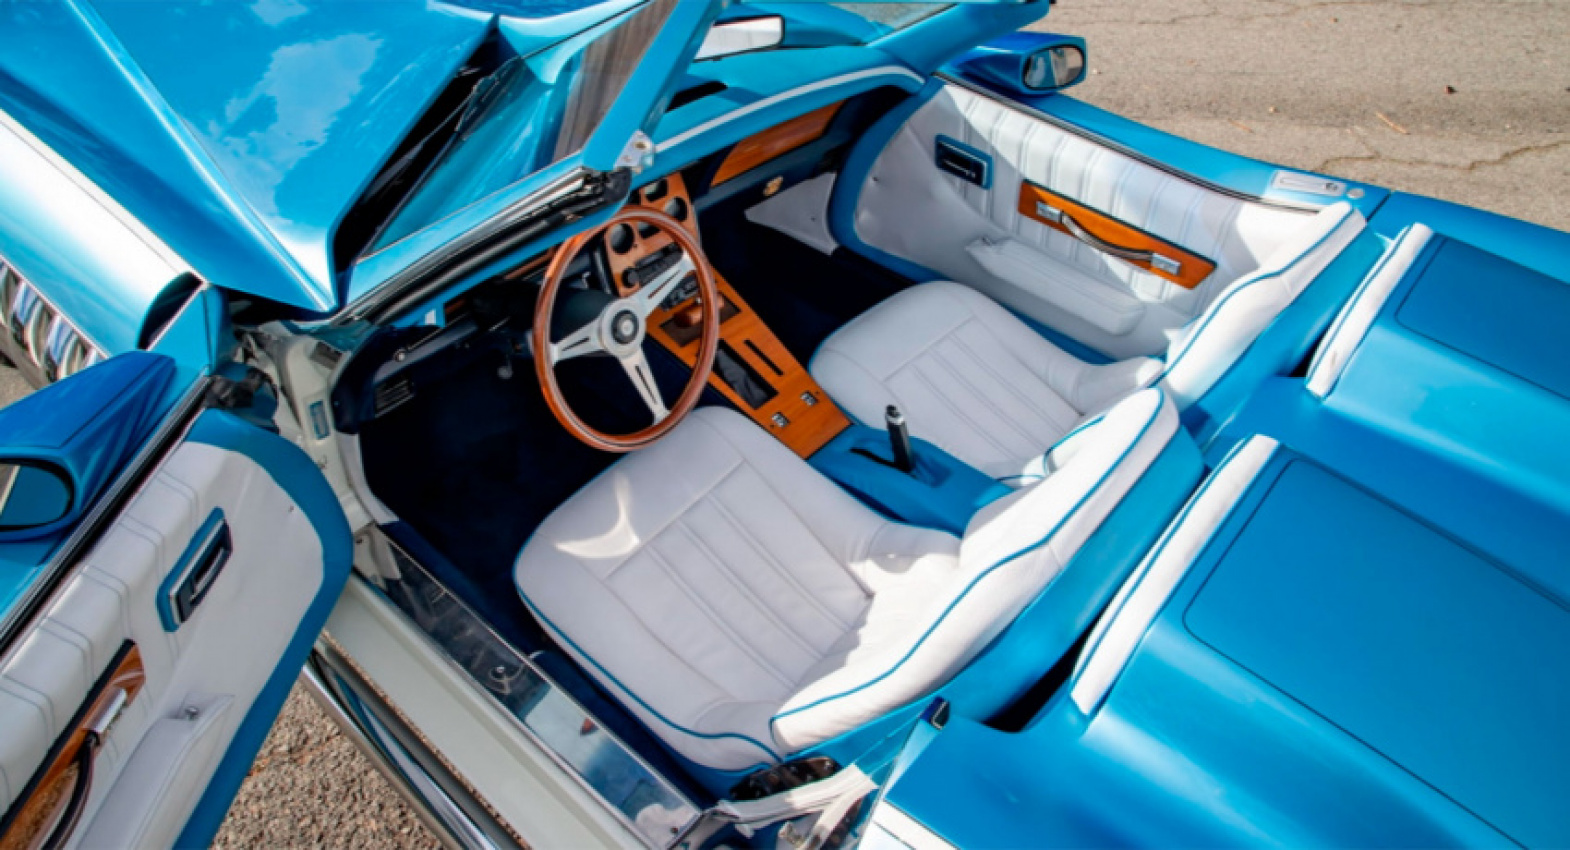 autos, cars, news, auction, chevrolet, classics, corvette, tuning, used cars, the 1969 corvette barrister is certainly one very interesting (and bizarre) creation